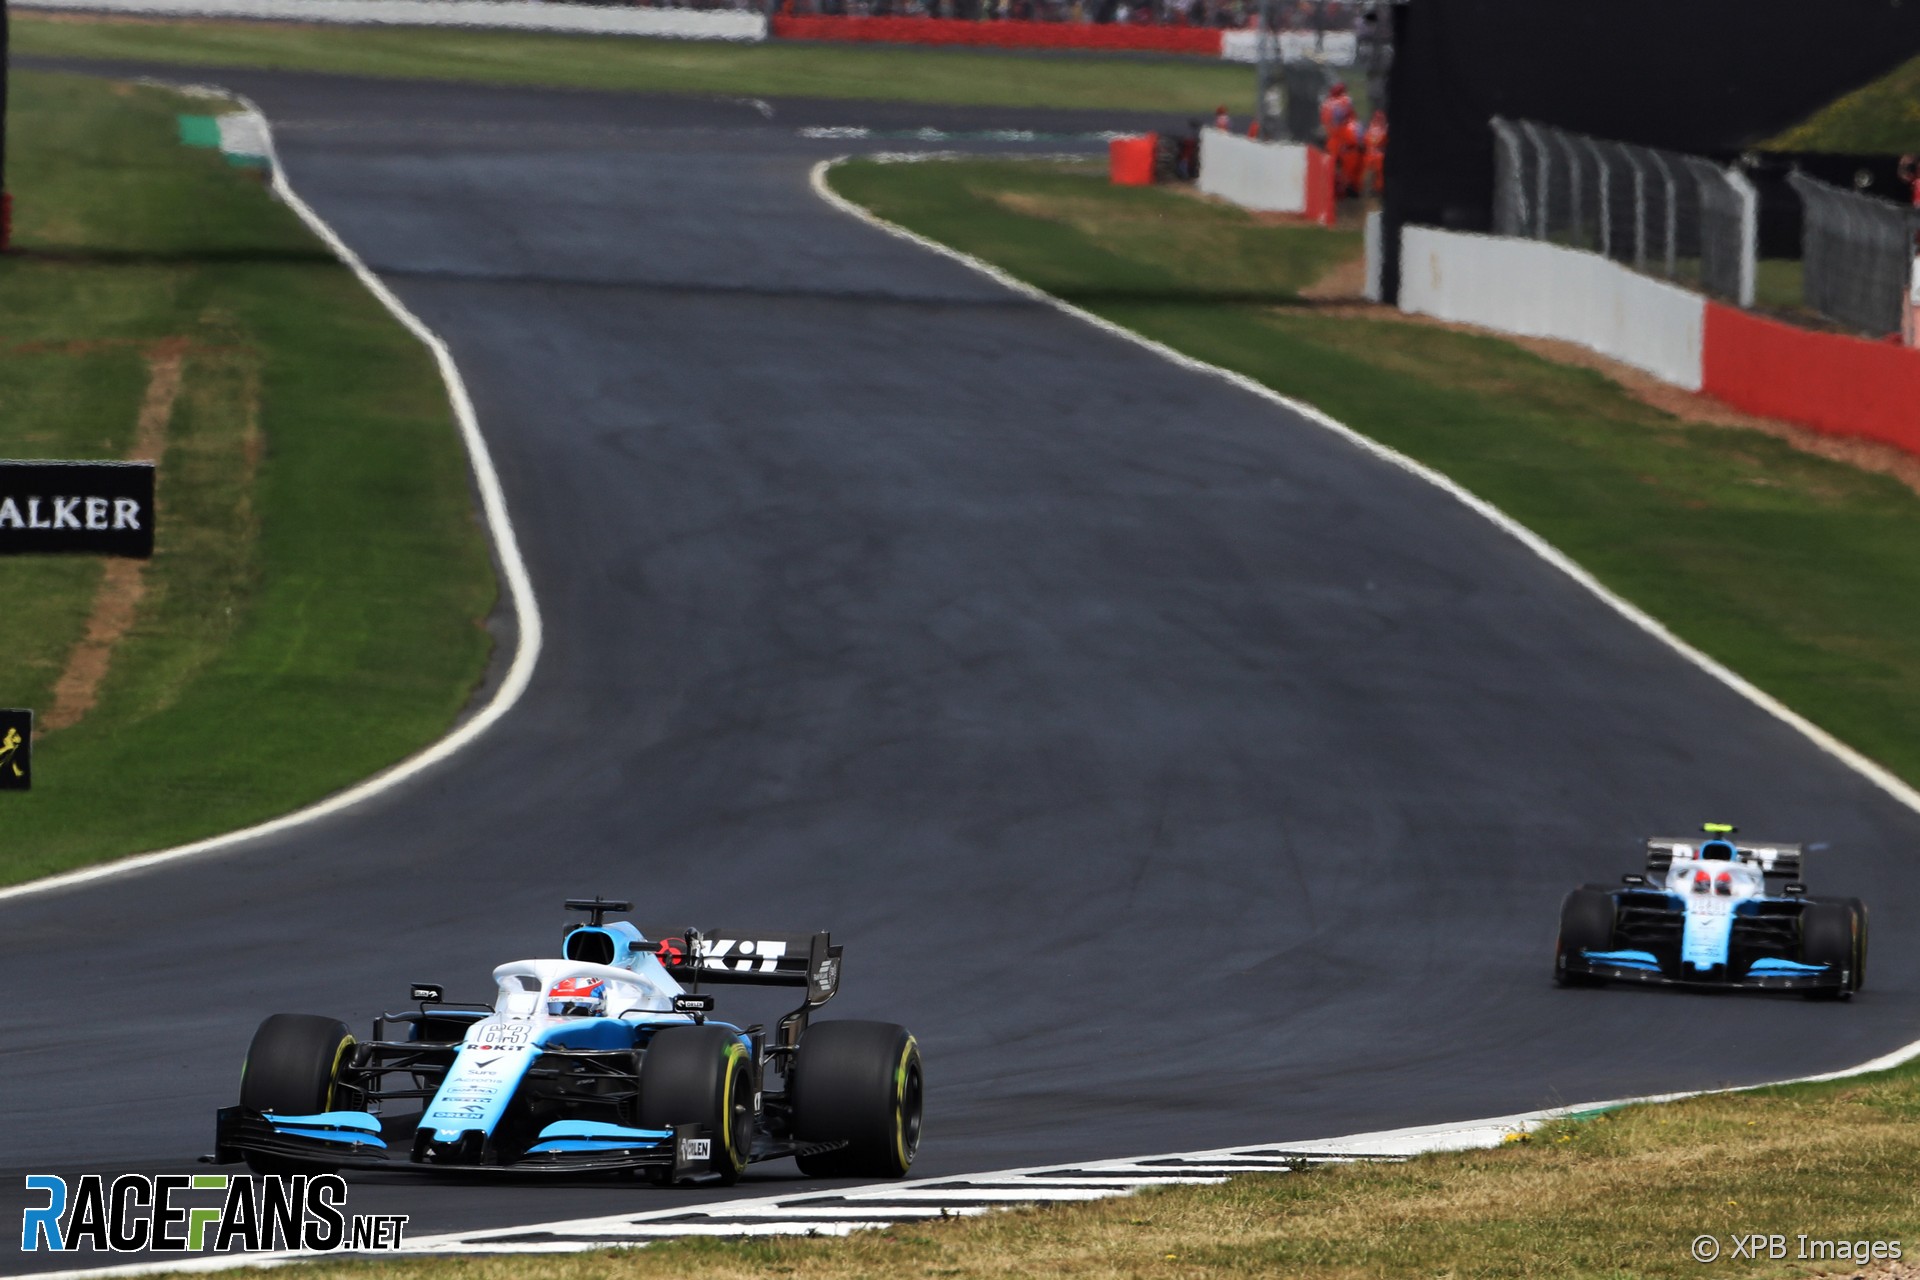 George Russell, Williams, Silverstone, 2019